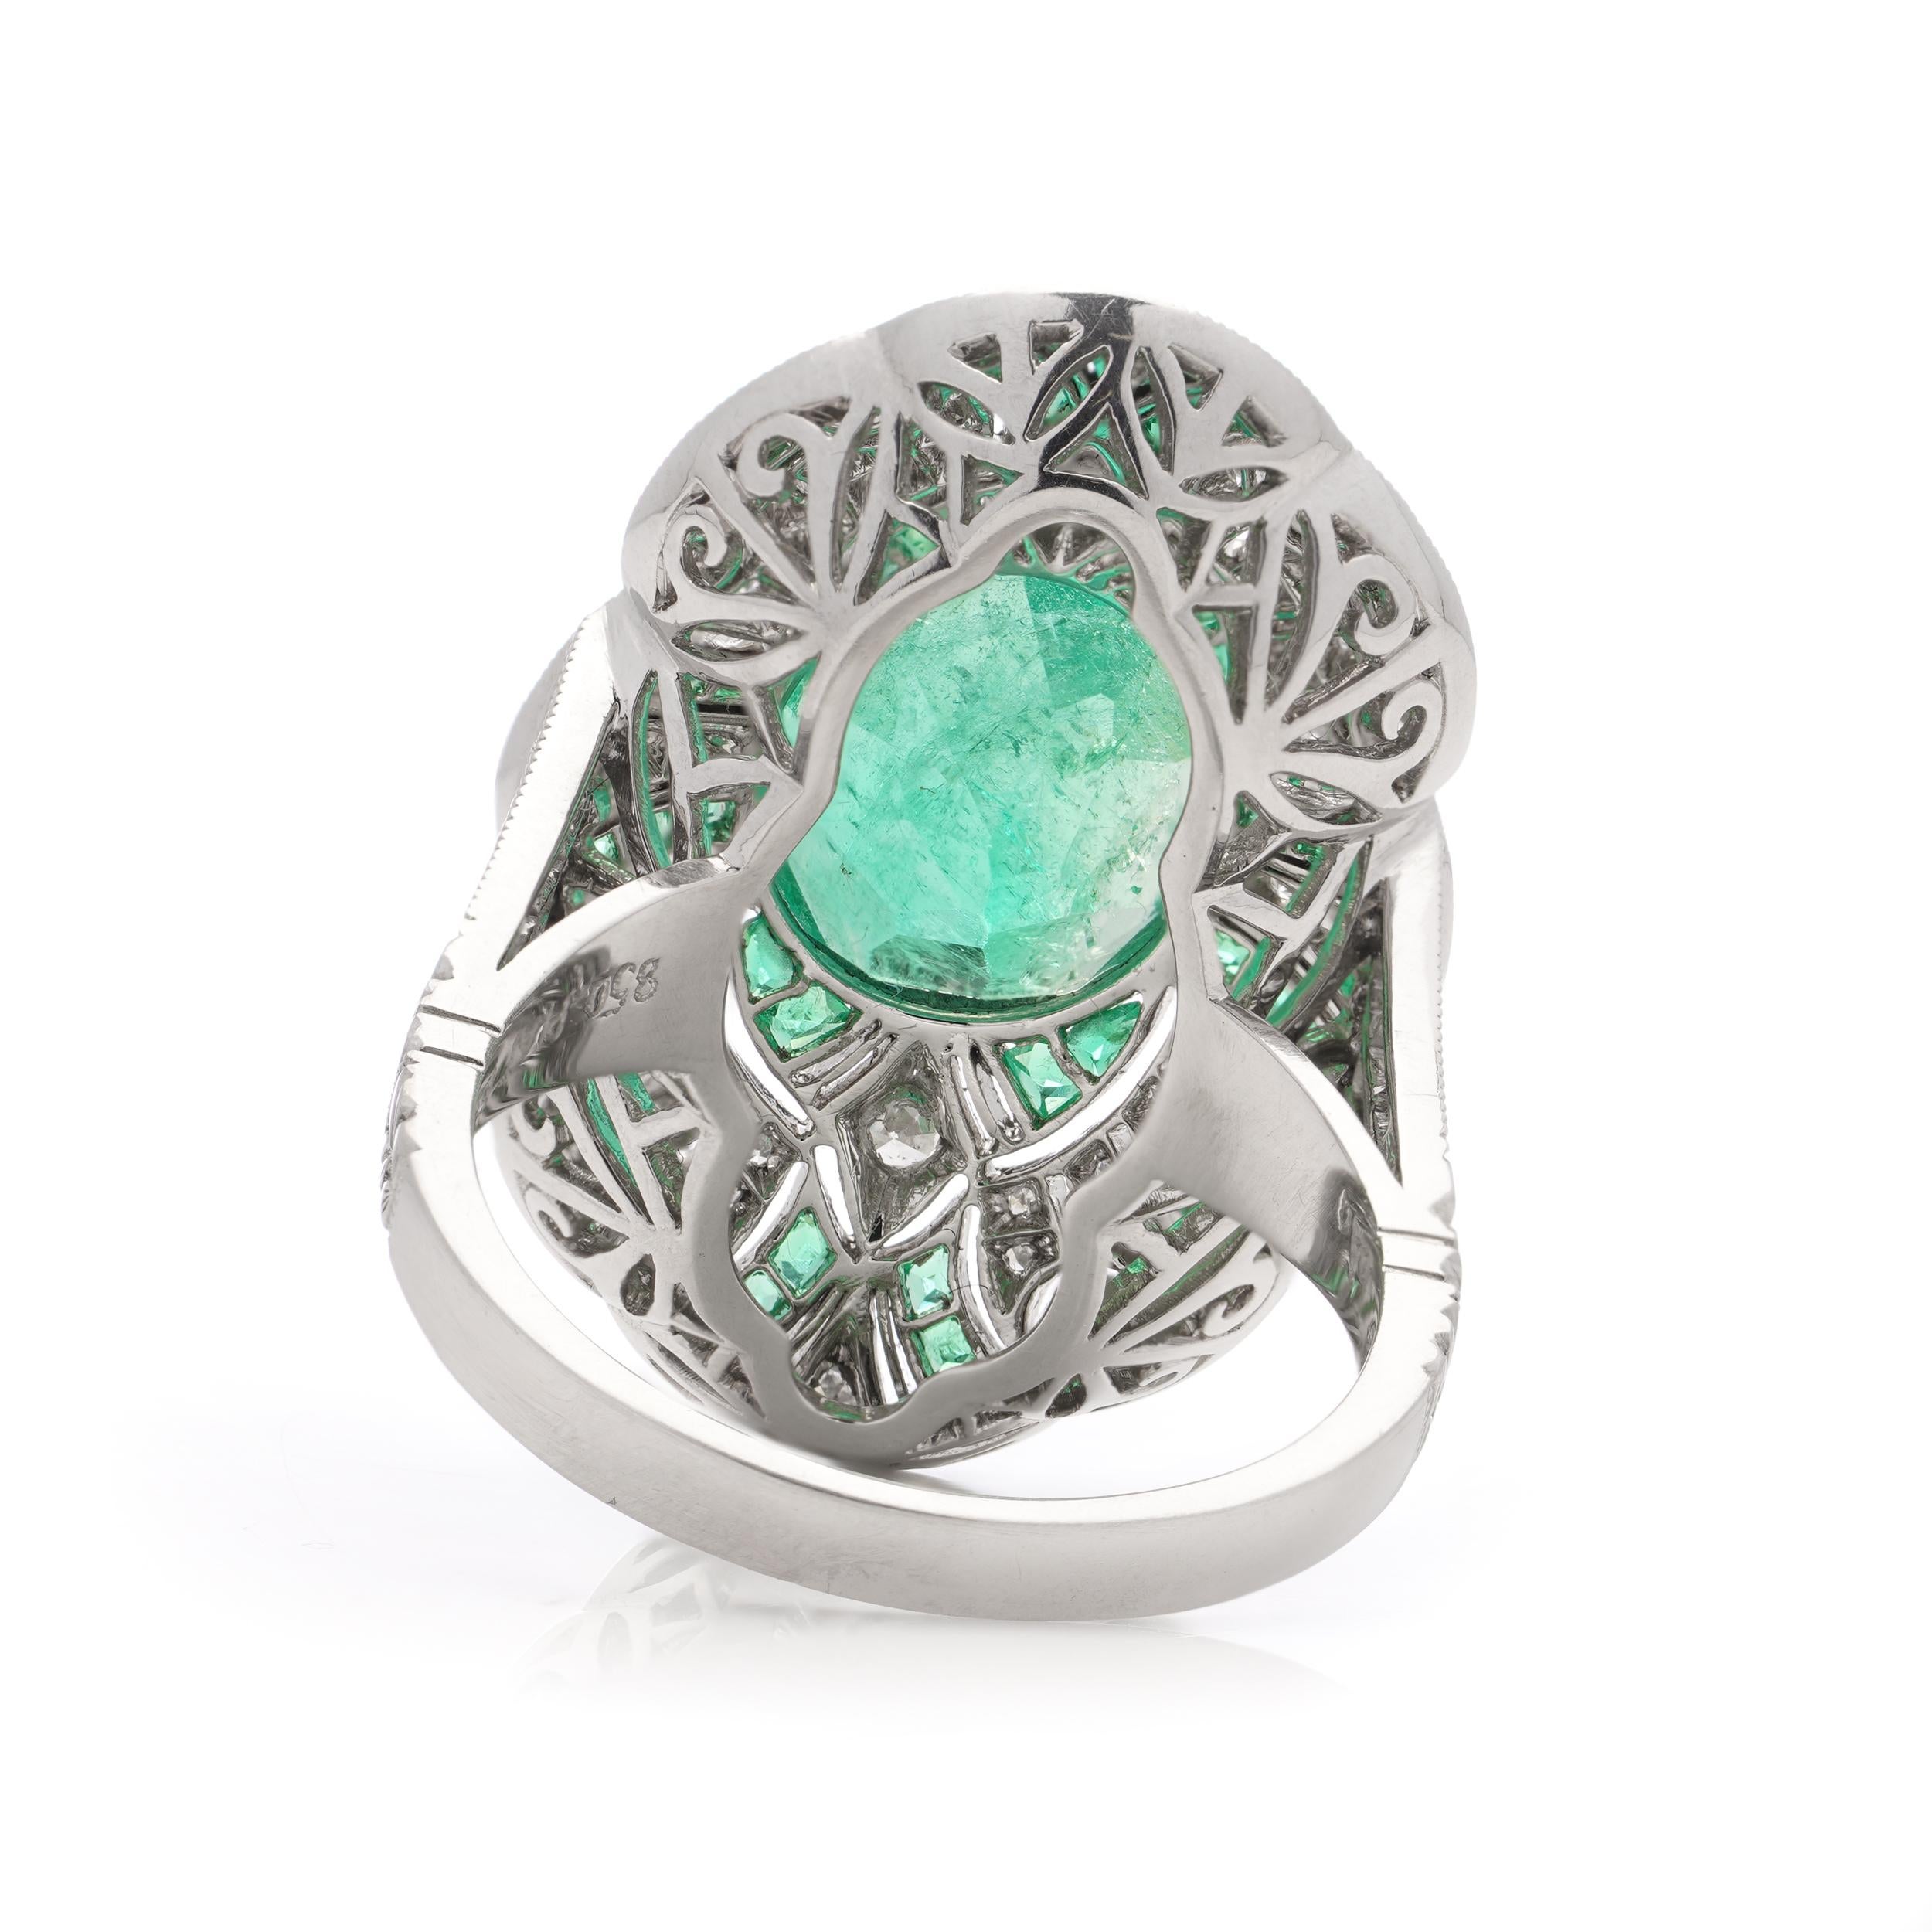 Women's Platinum Art Deco-inspired 3.62 carats of Emerald fashion ring For Sale